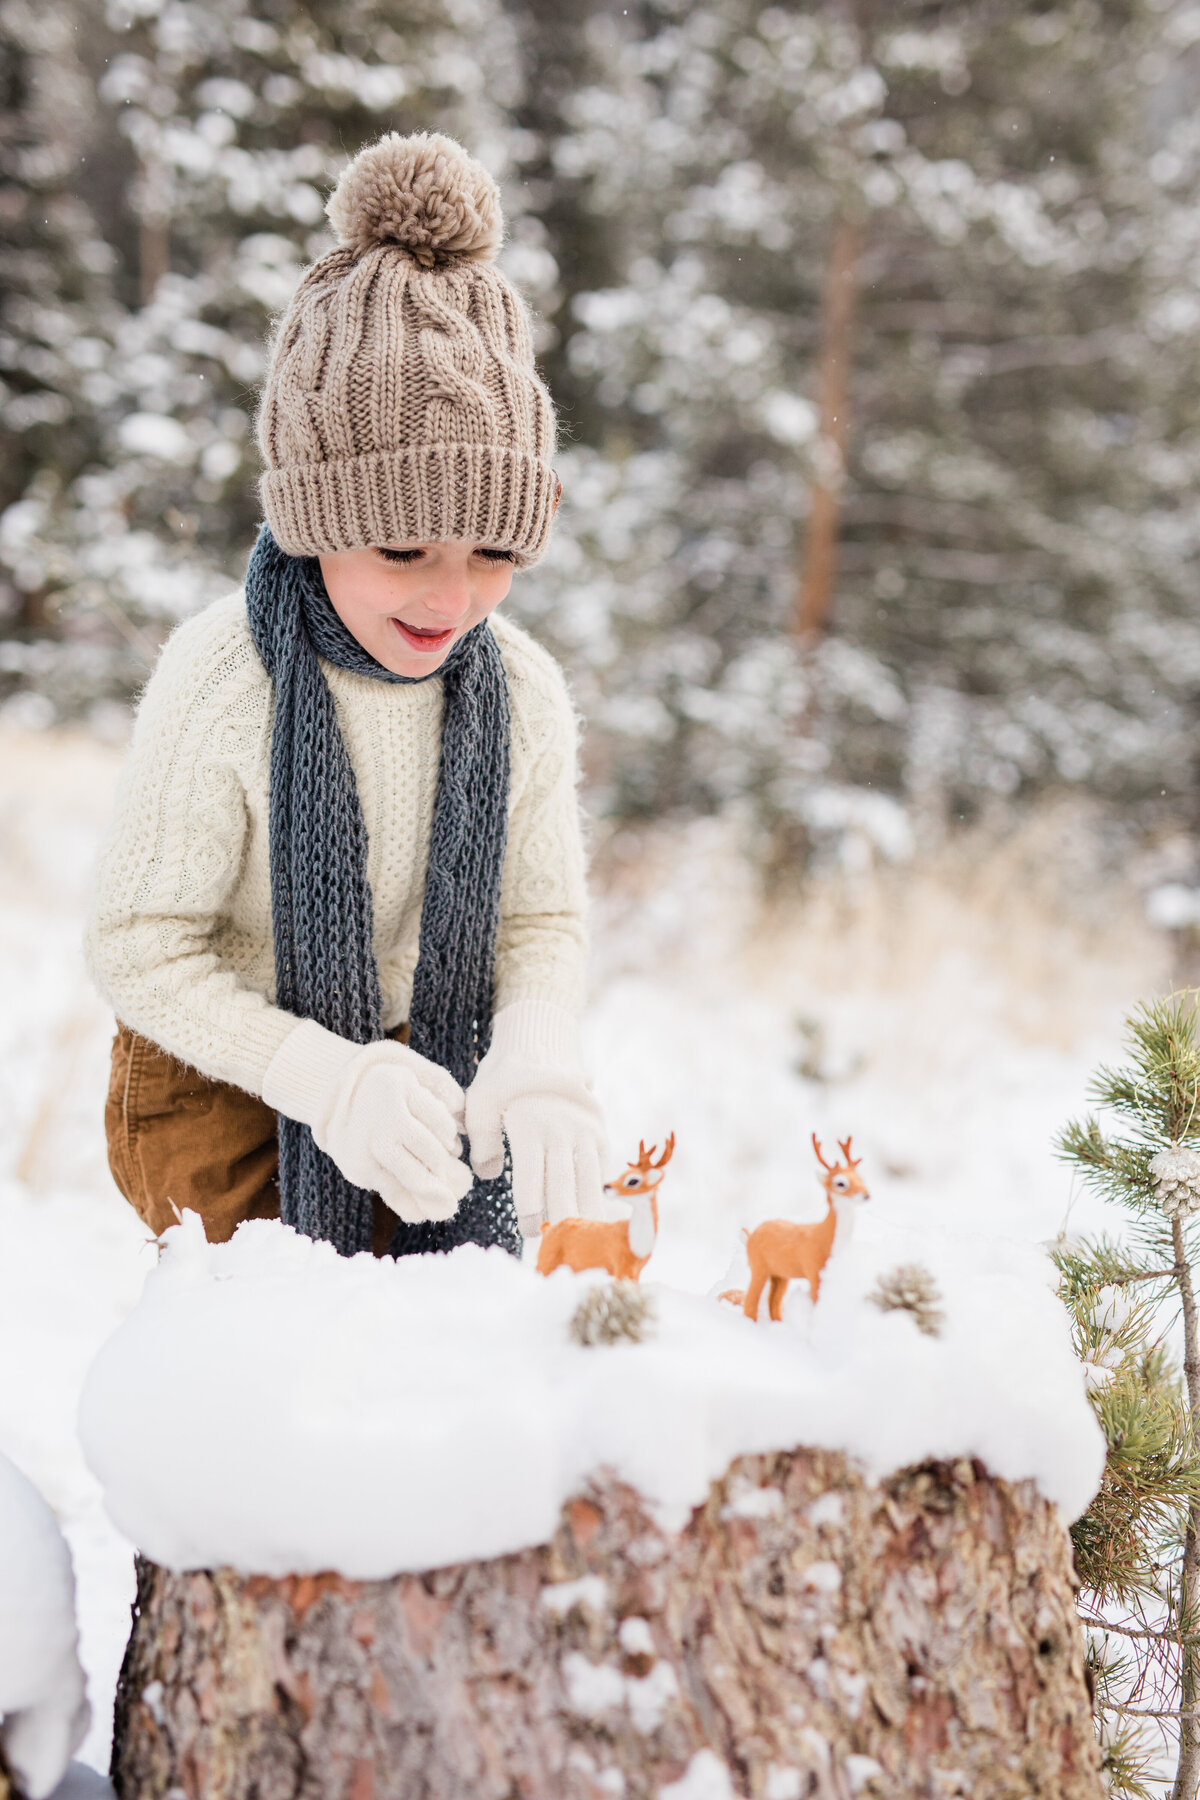 A young boy has his toy reindeer in front of him. He is playing with them in a snow covered field.